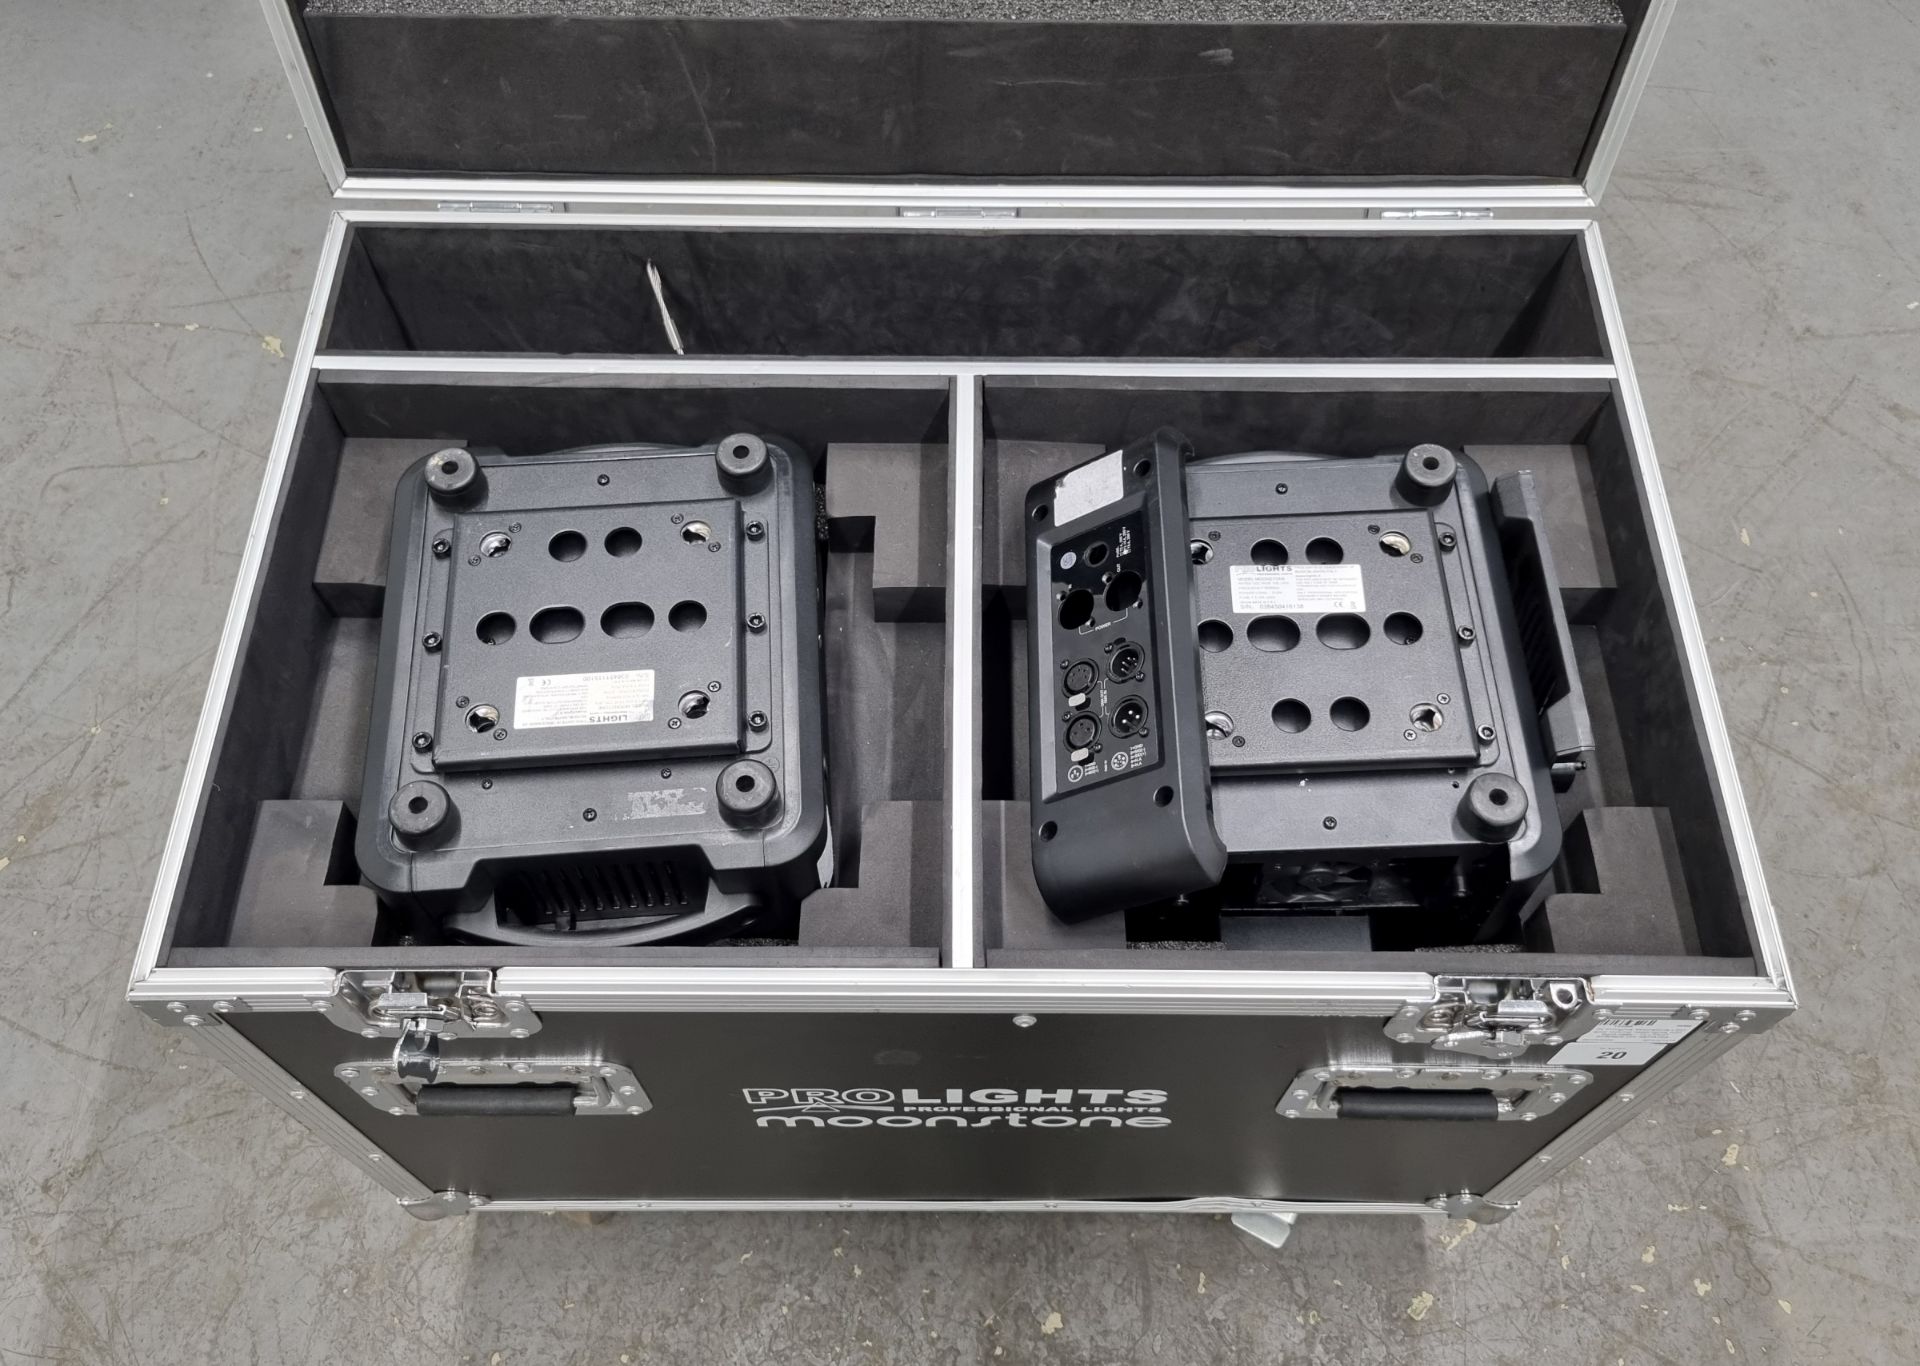 2x Prolights Moonstone LED spot moving head lights with flight case - 1x LIGHT SPARES OR REPAIRS - Image 11 of 14